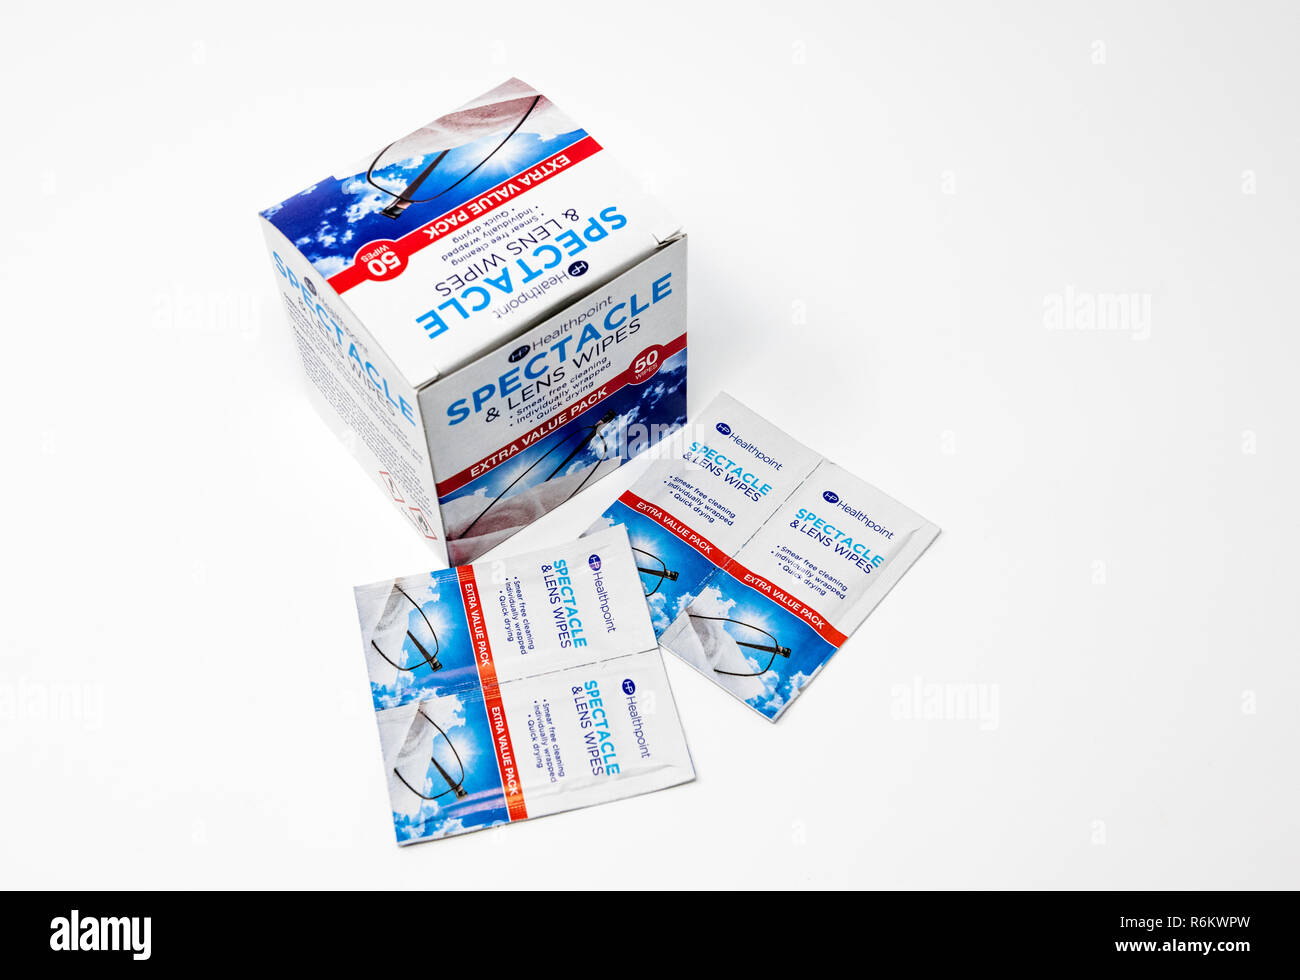 Healthpoint lens and spectacle wipes. Stock Photo